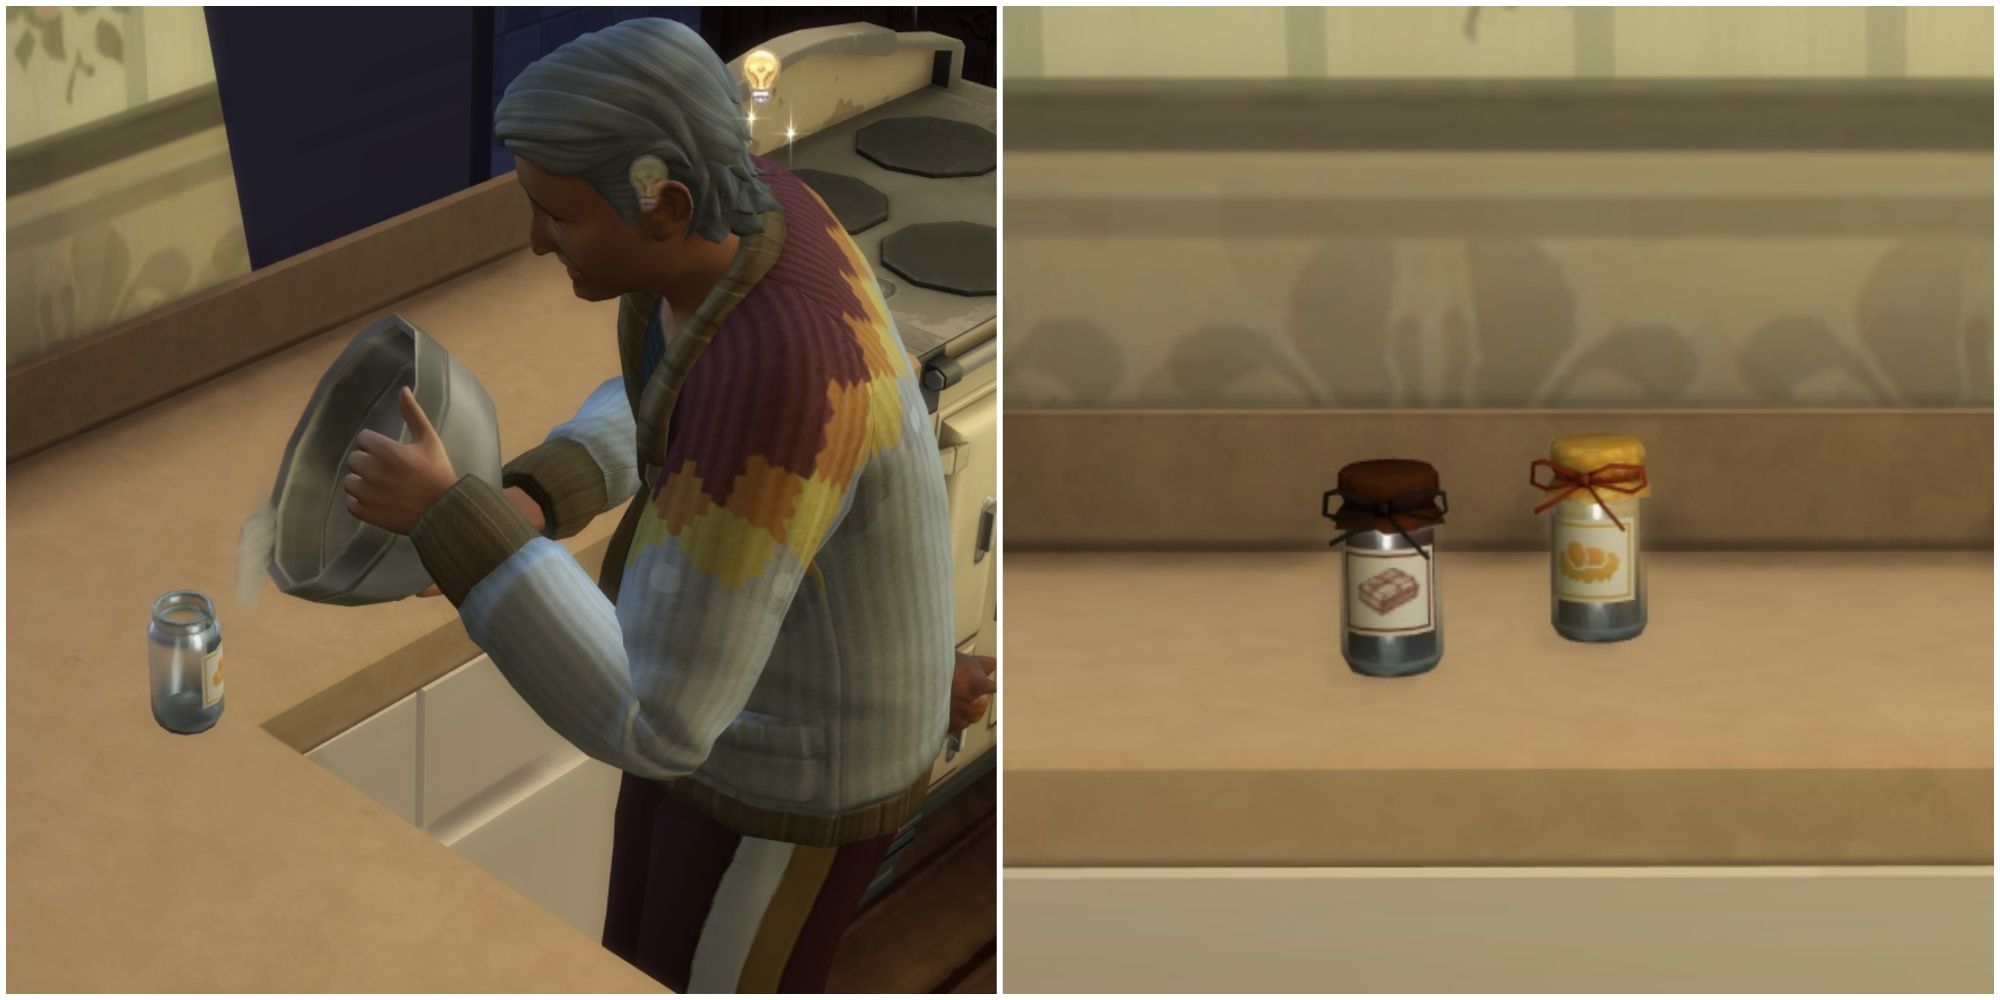 The Sims 4: Canning Guide